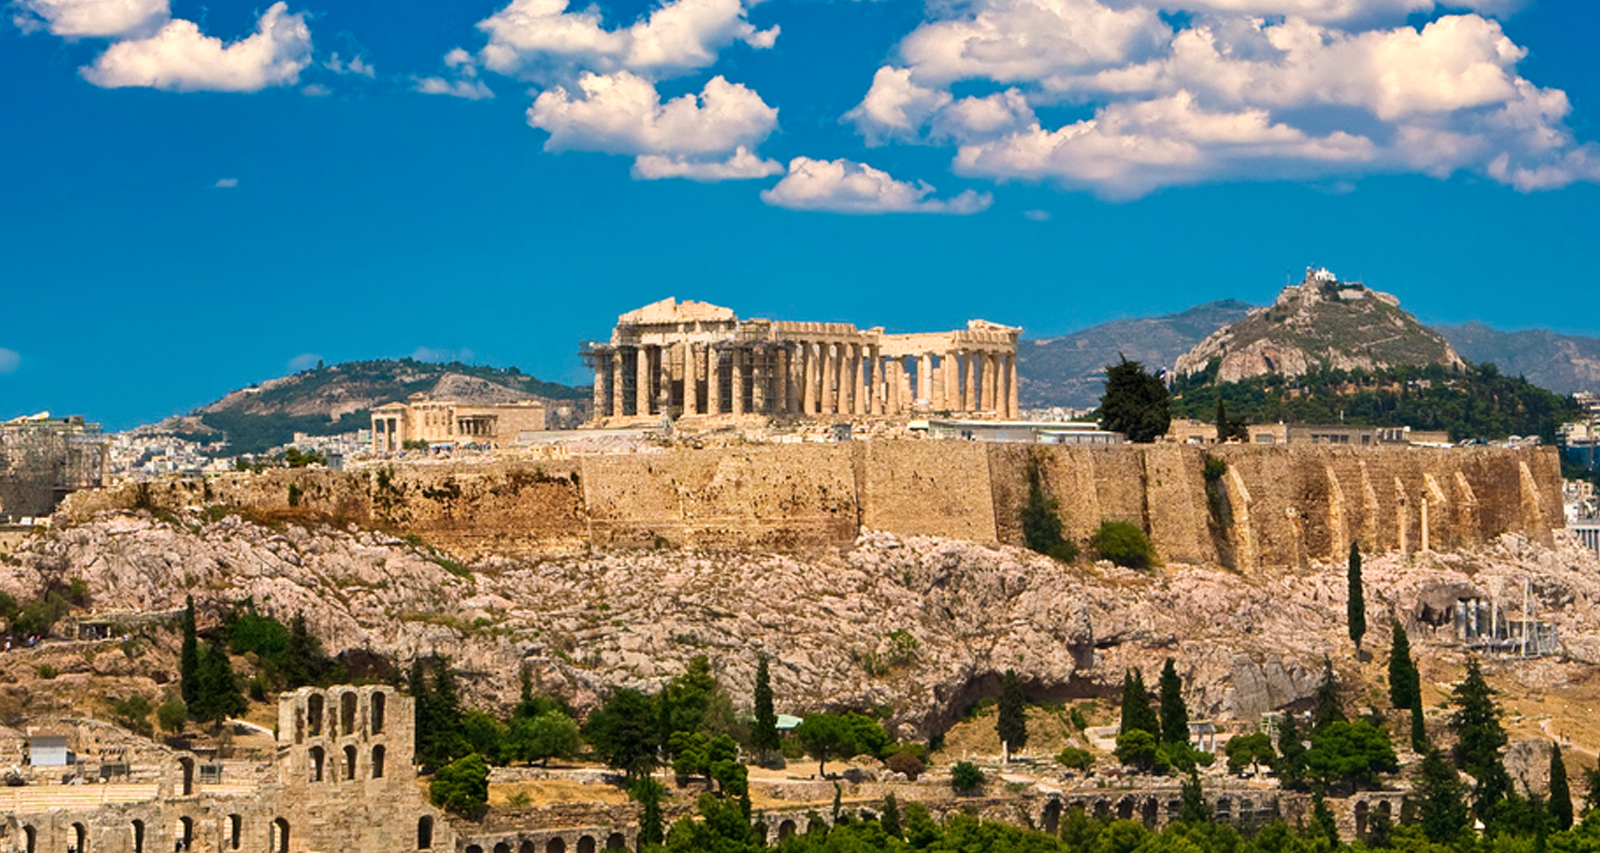 Athens travel guide for first-time visitors - Best Places to Visit in Europe - planningforeurope.com (1)